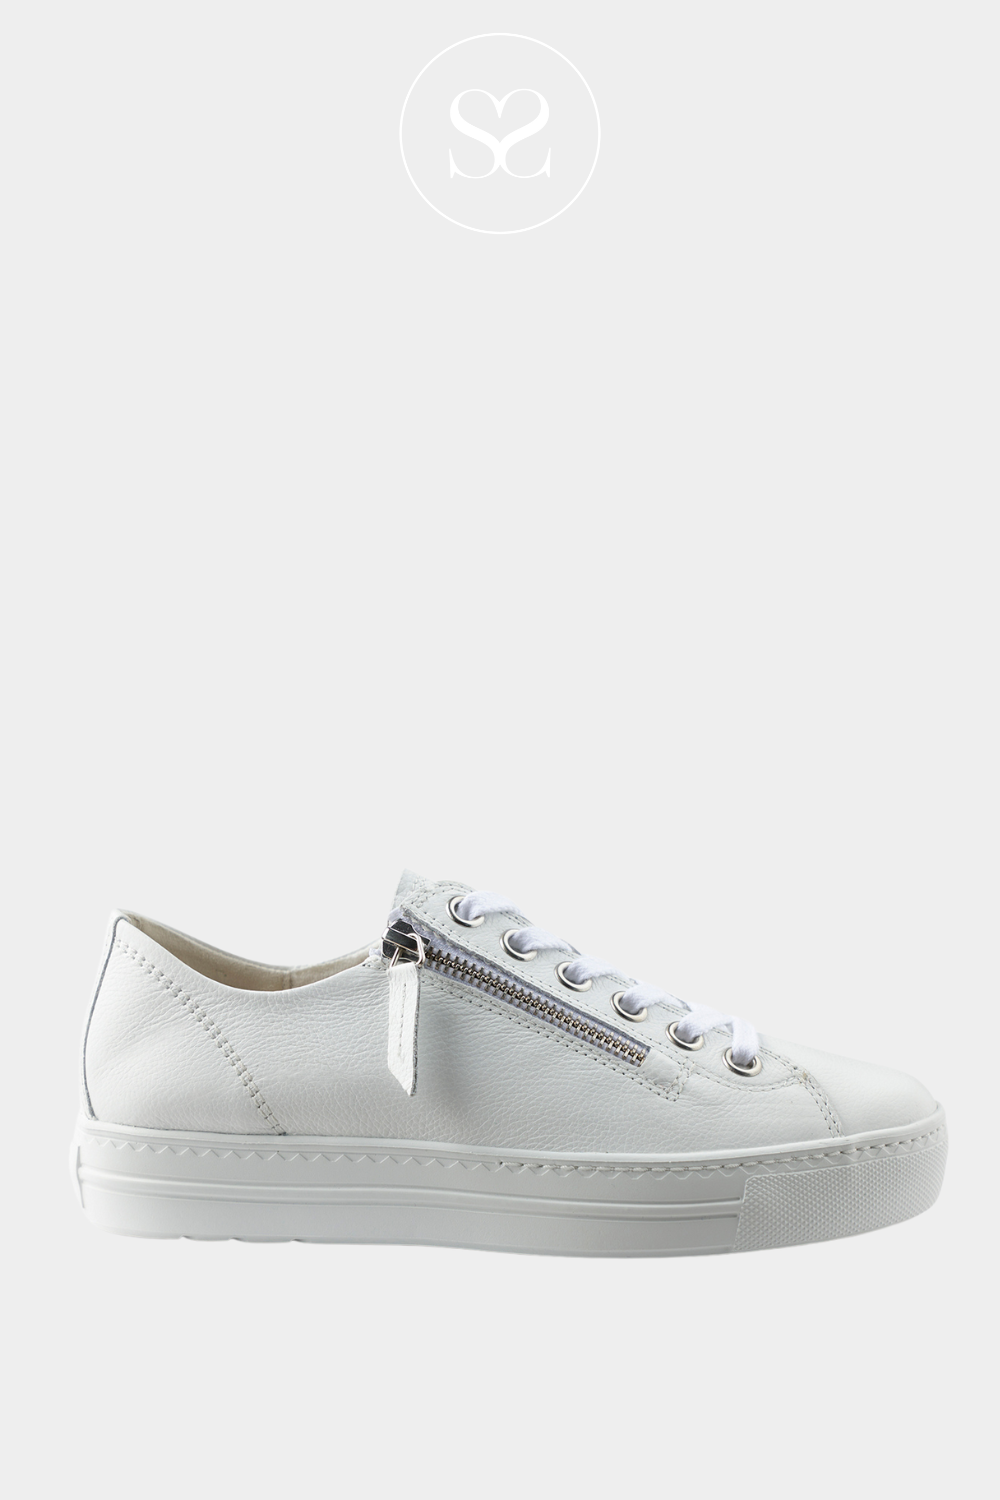 paul green 5006 white platform trainers with silver zip